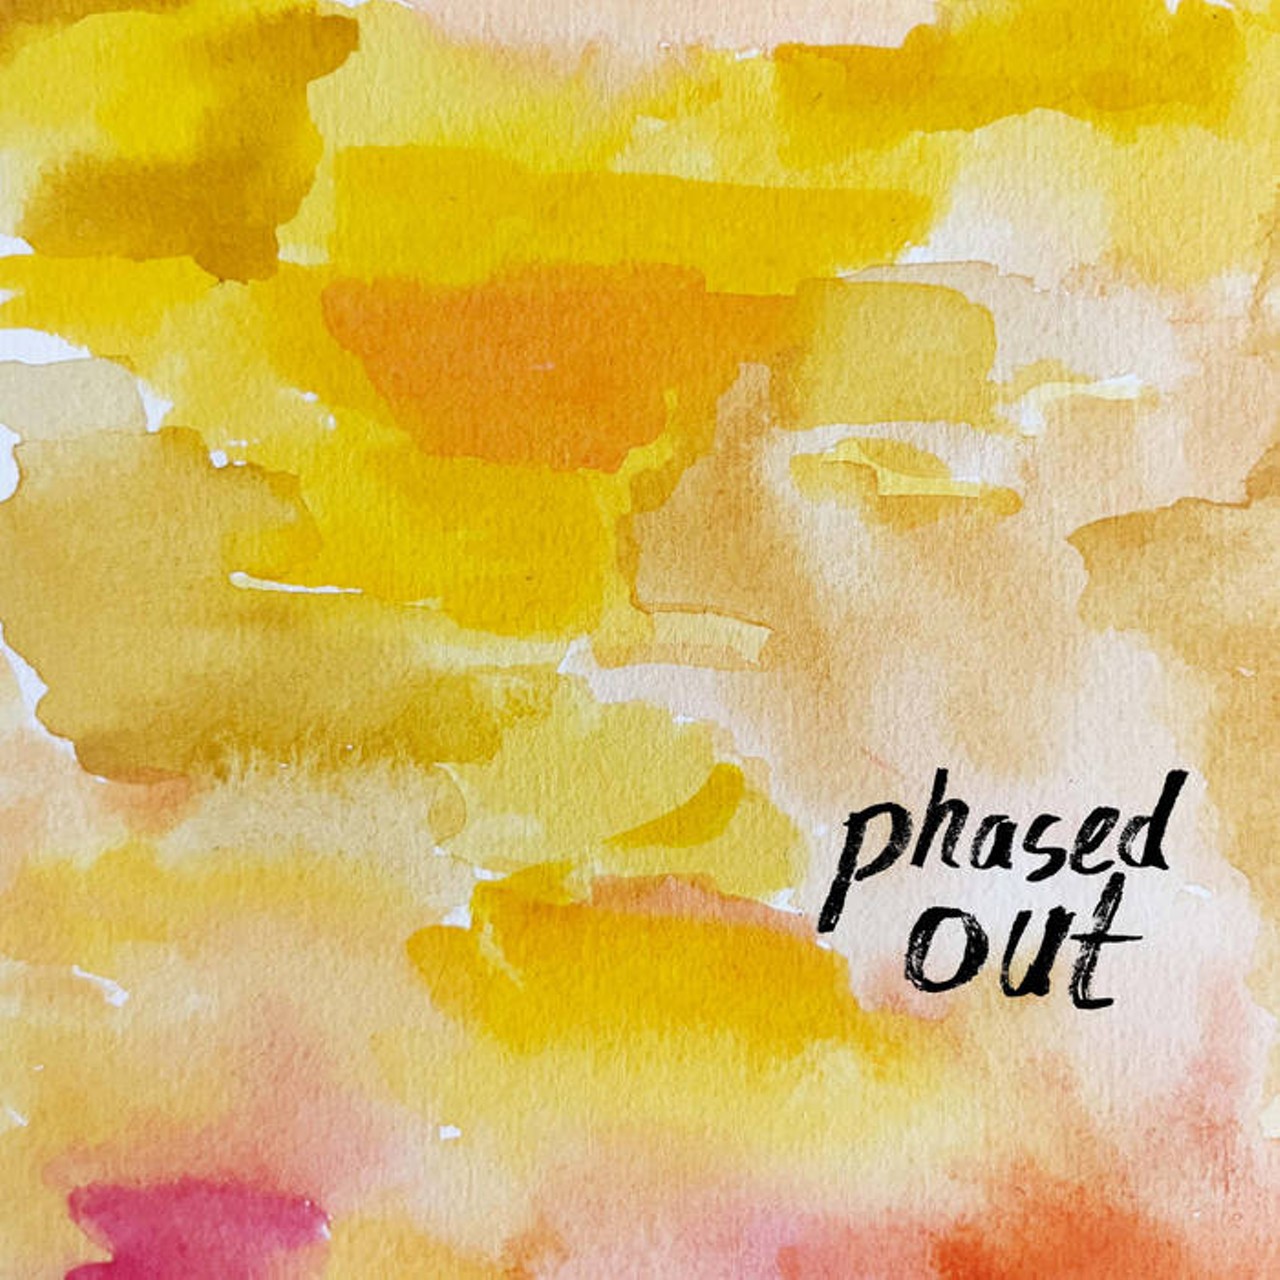 Phased Out: Got It EP
(Forge Again)
Careening in at the end of the year is a four-track scorcher from Phased Out. They’re a band that I’ve been lucky enough to catch live on multiple occasions, playing many local bills and offering support to touring acts that roll through the dive bar venues. Phased Out recording their new tape Got It is like making a pie or a cocktail: the ingredients are simple, but when you use that good stuff, you can really taste the difference. The guitar, bass, and drums all mesh together seamlessly, for a noisy, potent wake up call. Dina Bankole lends her vocals on top of it all, recalling her days in Casual Sweetheart (definitely one of the best Detroit bands from the last decade). Grip a cassette while you can, and grab another so you’re prepared when your first copy wears out. —Joe